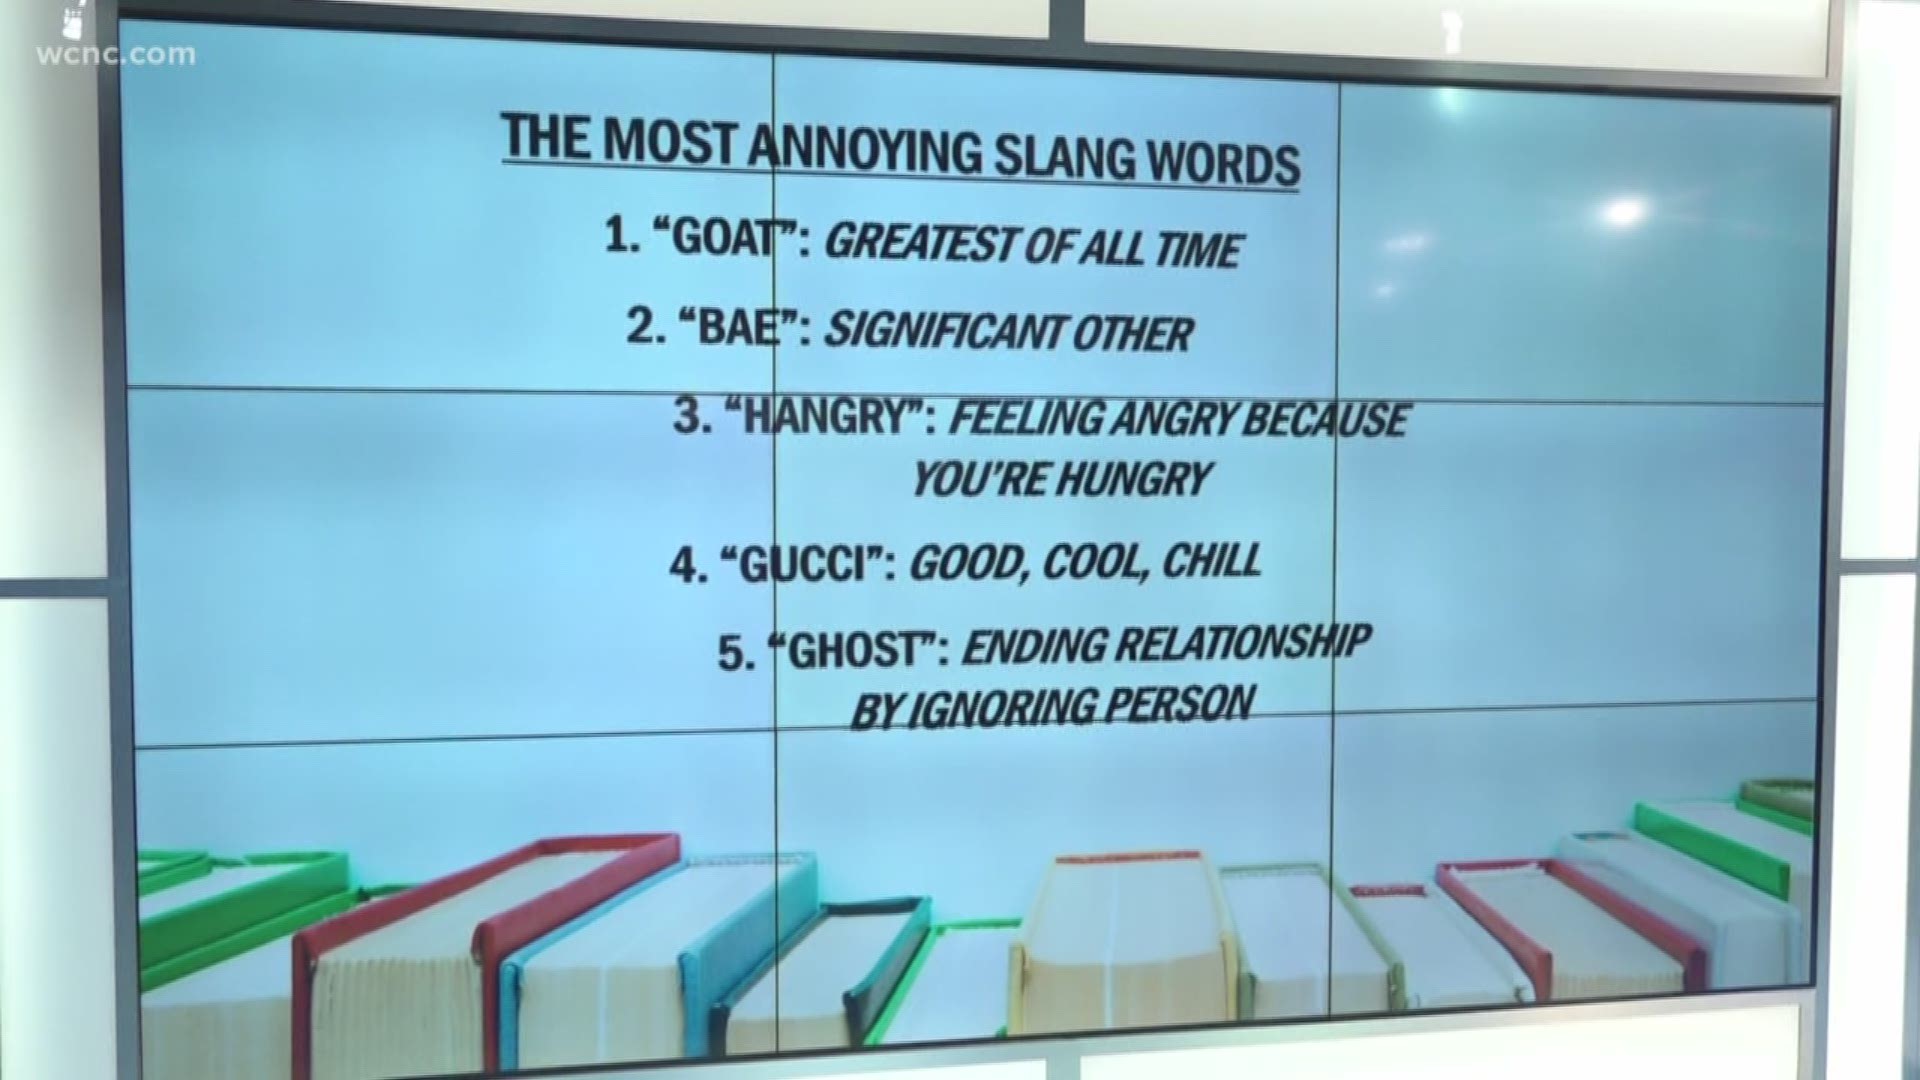 These are the most annoying slang words Americans use